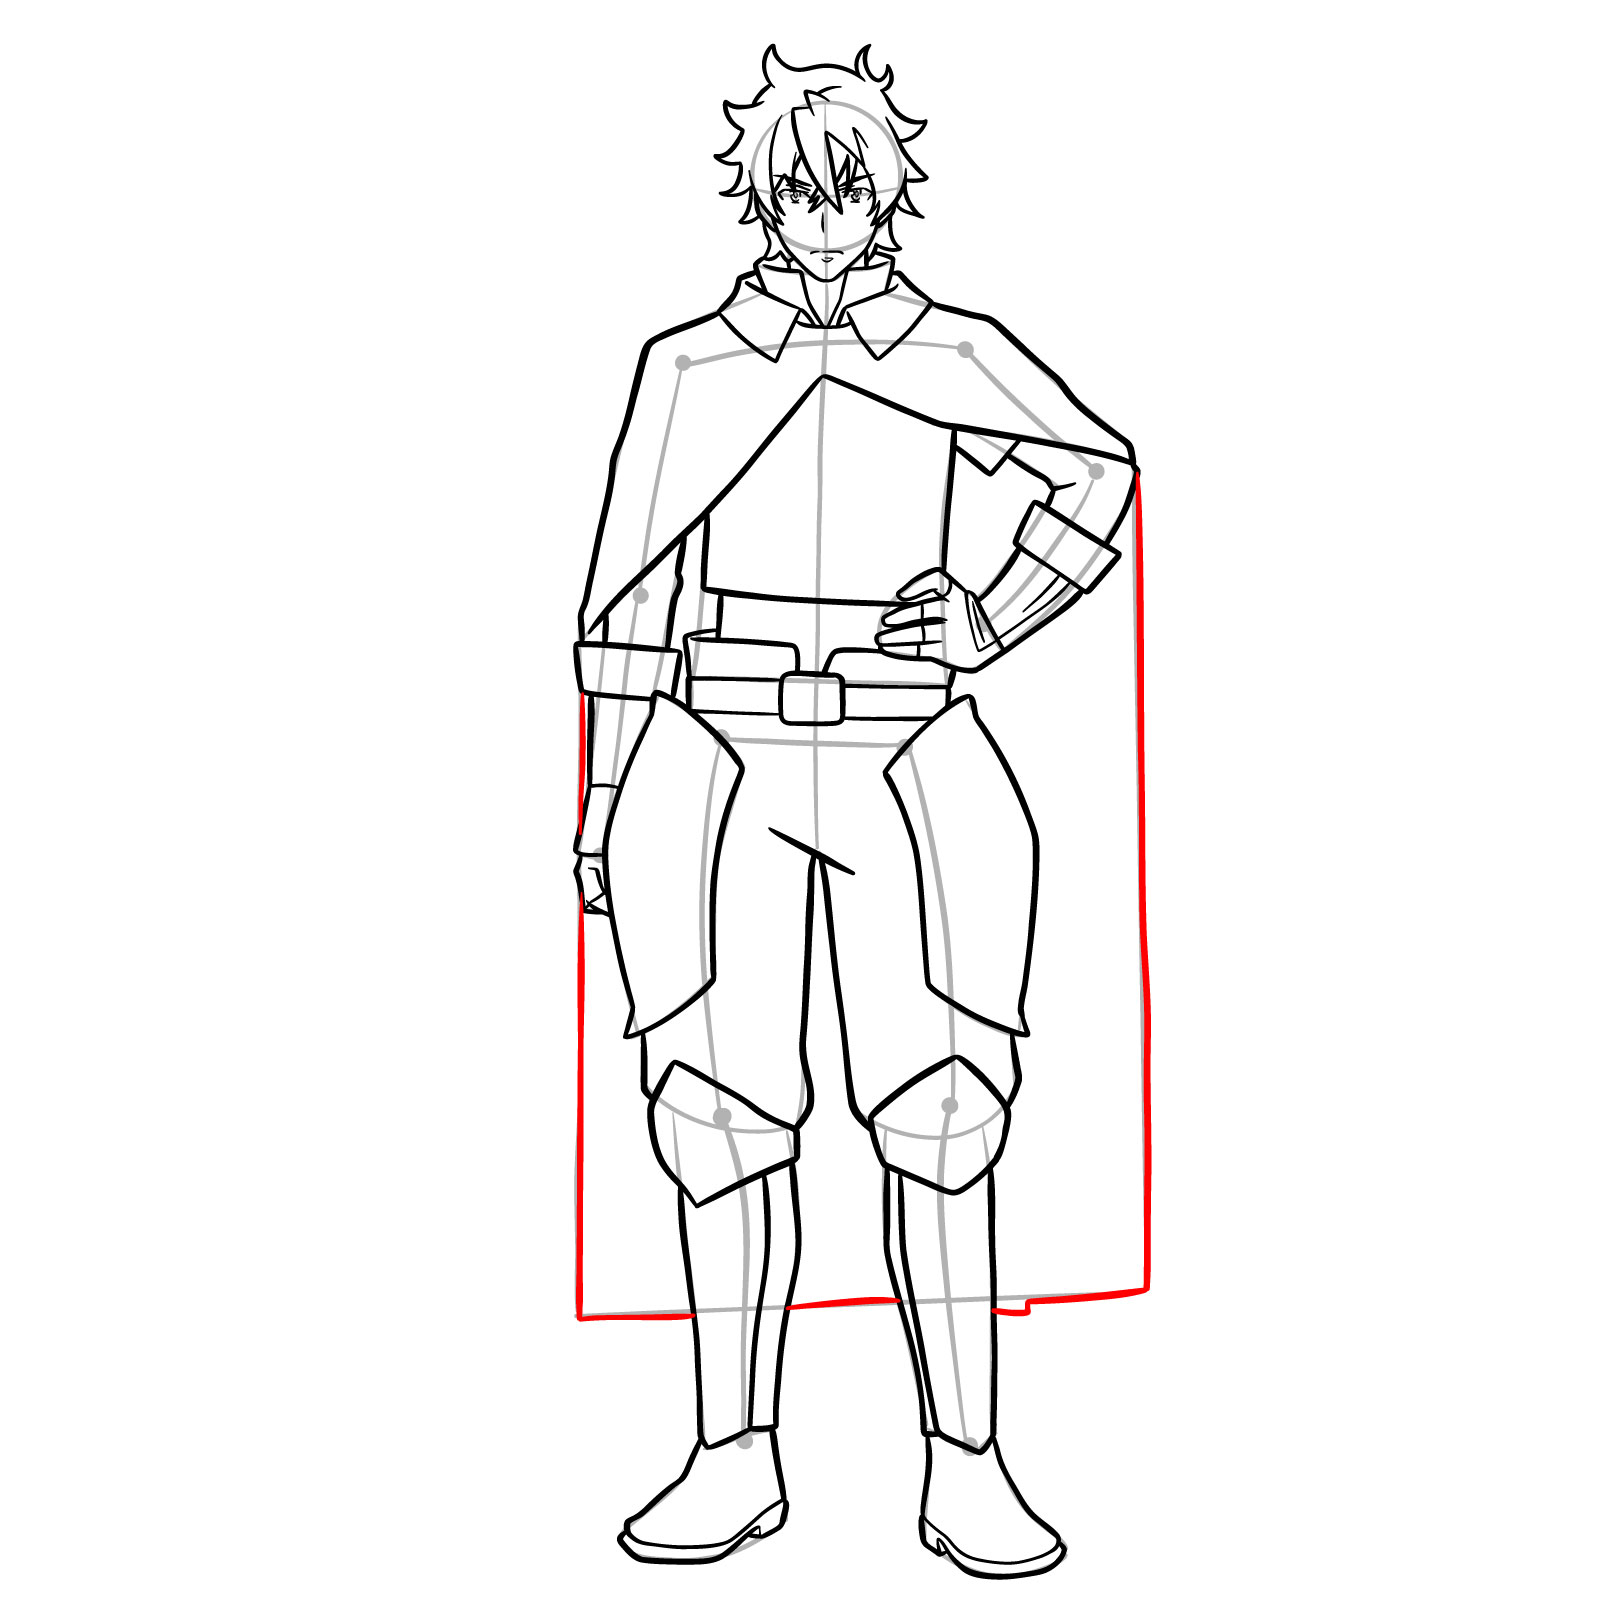 How to draw Naofumi Iwatani from The Rising of the Shield Hero - step 23